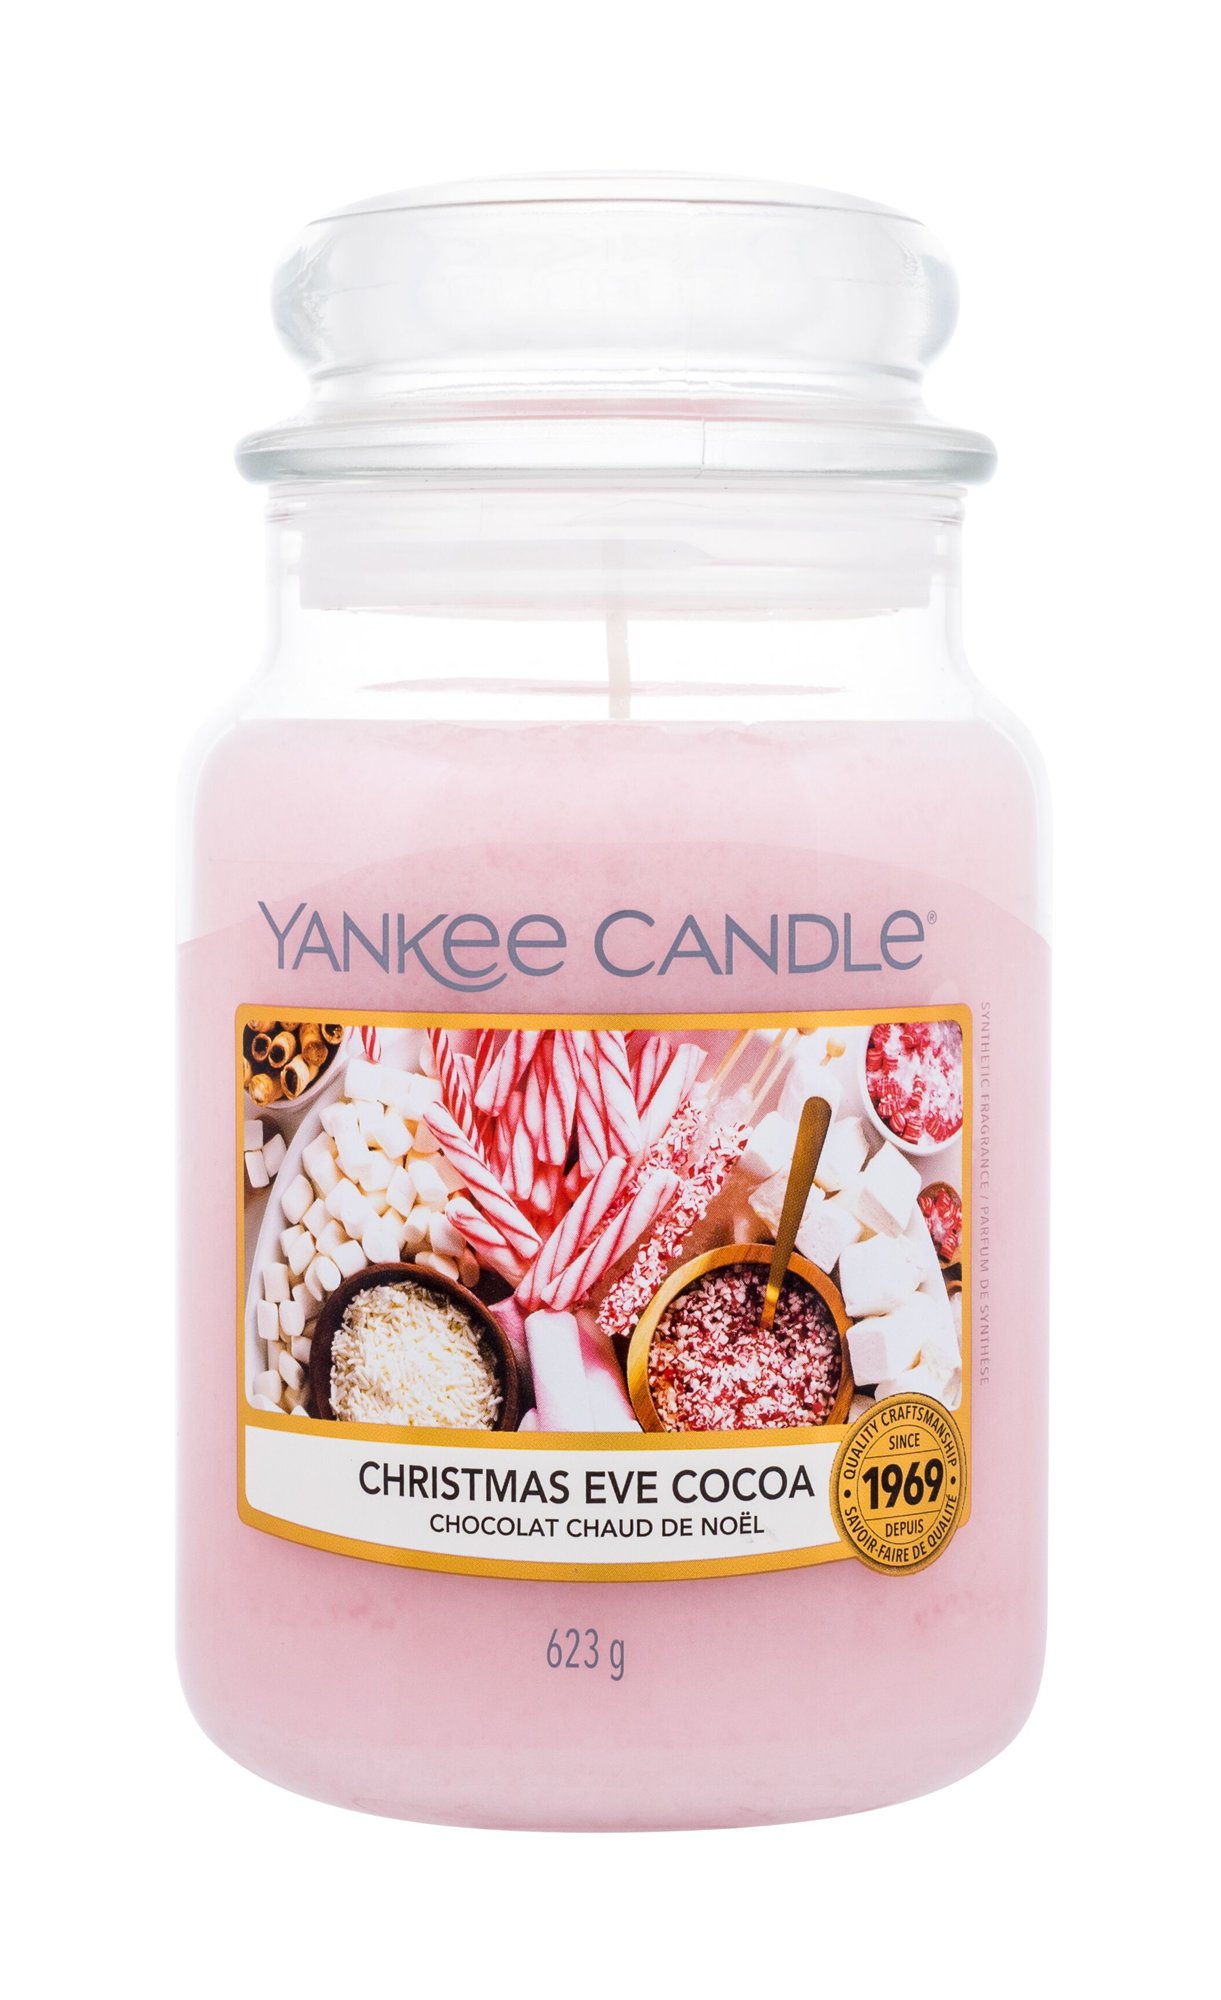 Yankee Candle Christmas Eve Cocoa 623g Kvepalai Unisex Scented Candle